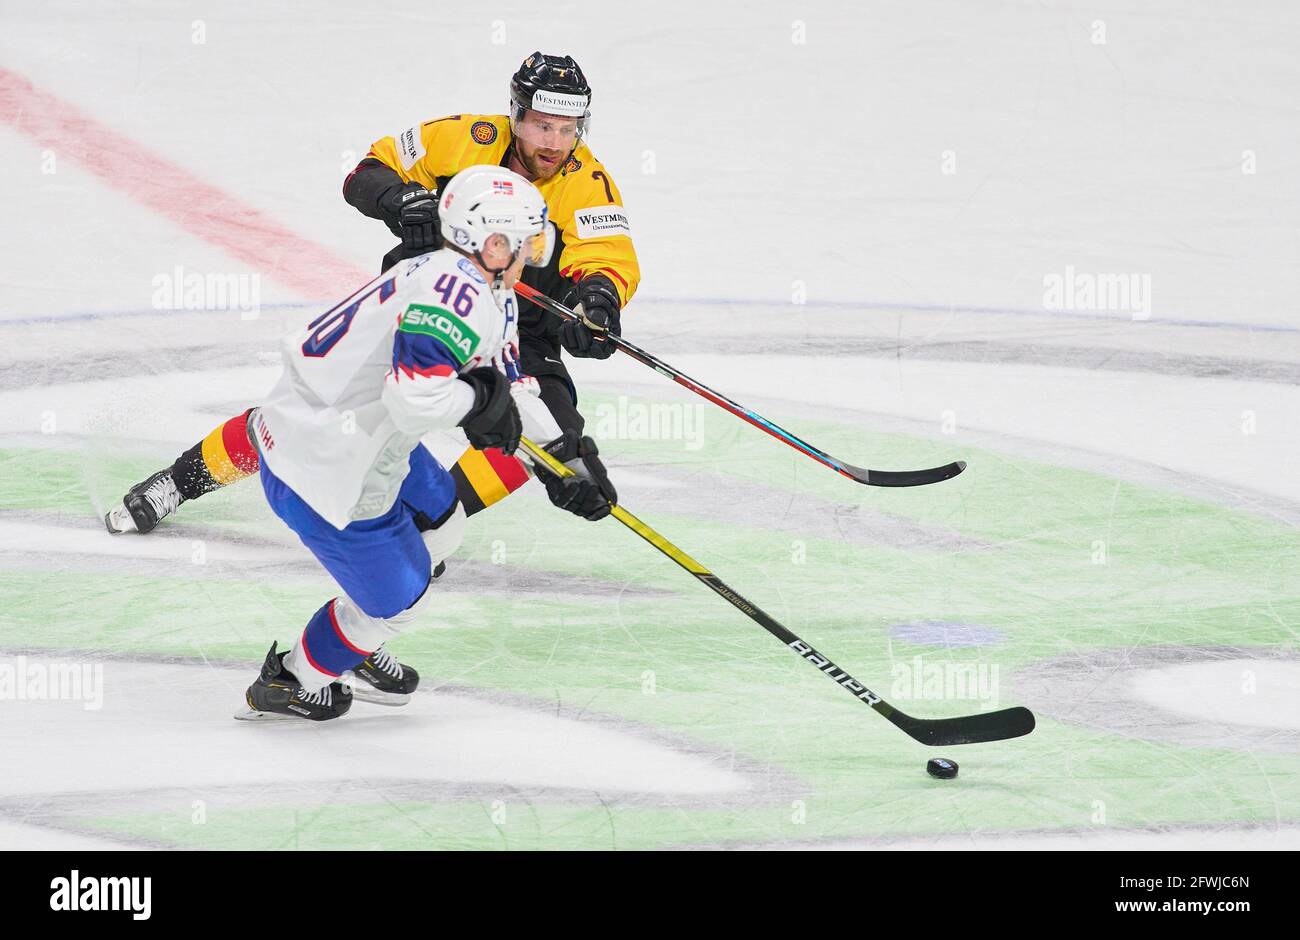 Riga, Latvia. 22nd May, 2021. Maximilian KASTNER, DEB 7 compete, fight for the puck against  Mathias OLIMB, #46 of Norway  NORWAY - GERMANY 1-5 IIHF ICE HOCKEY WORLD CHAMPIONSHIPS Group B  in Riga, Latvia, Lettland, May 22, 2021,  Season 2020/2021 © Peter Schatz / Alamy Live News Credit: Peter Schatz/Alamy Live News Stock Photo